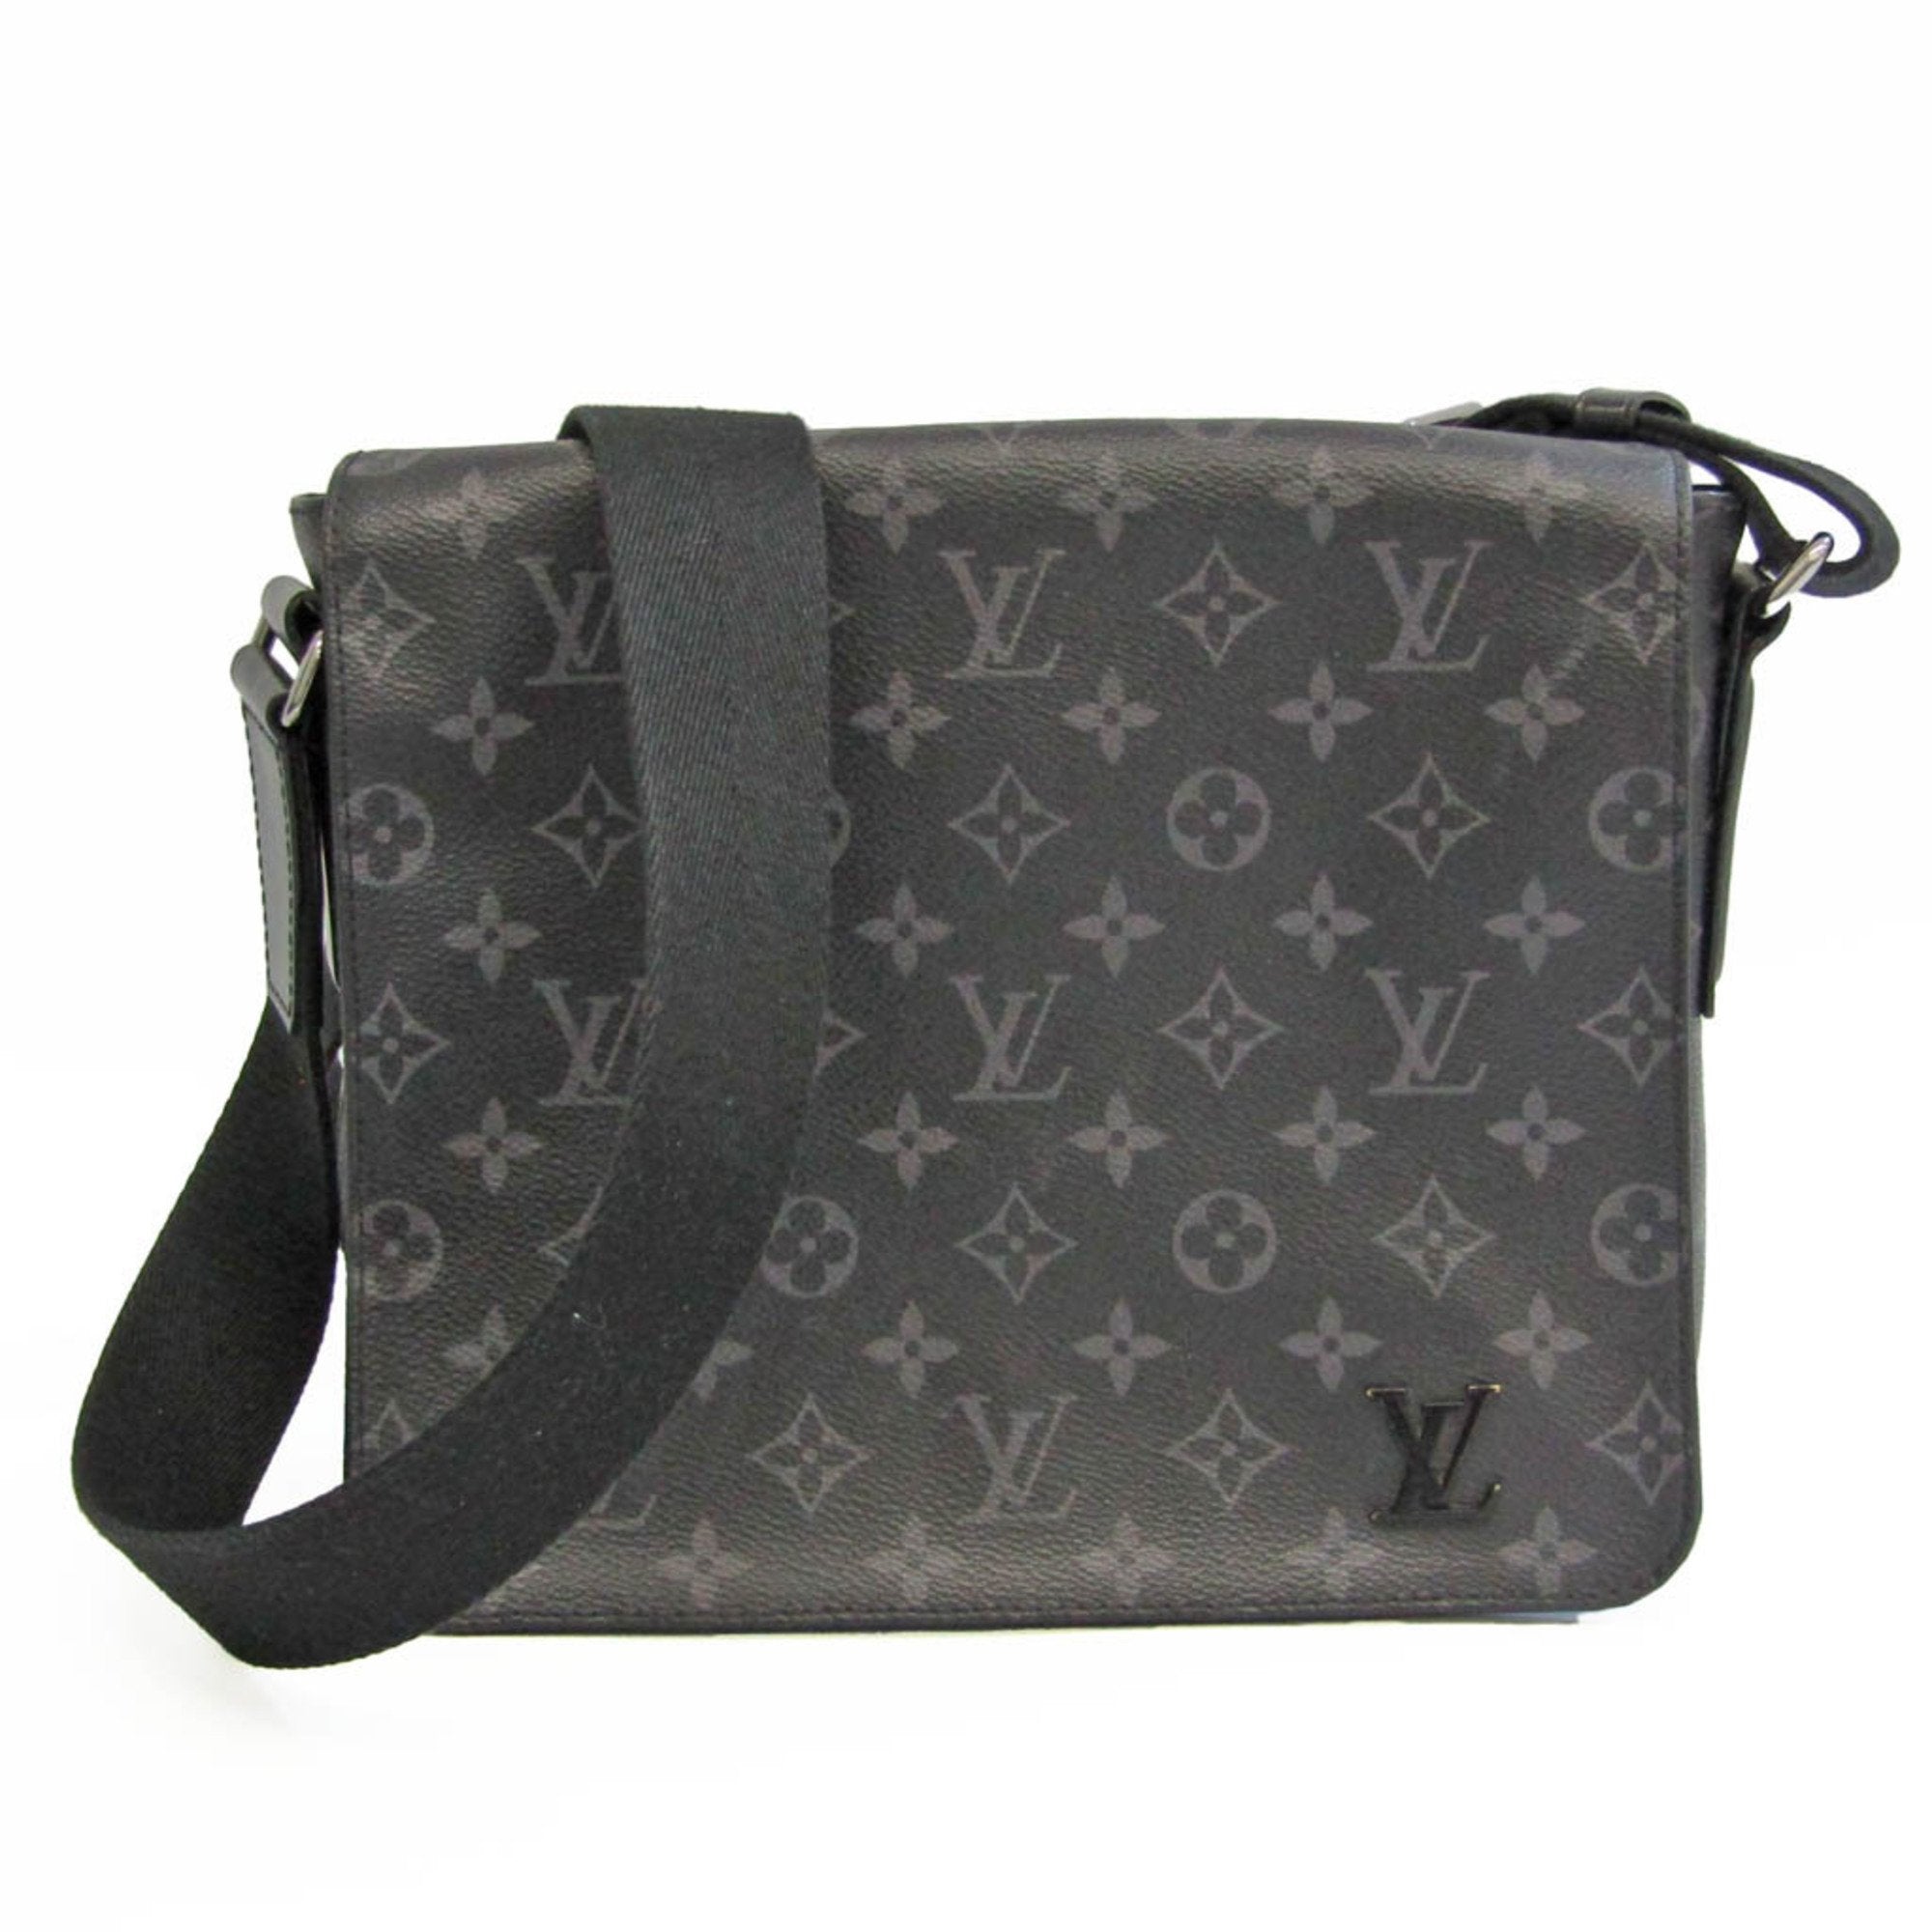 Louis Vuitton District Pm M44000 Price Listed